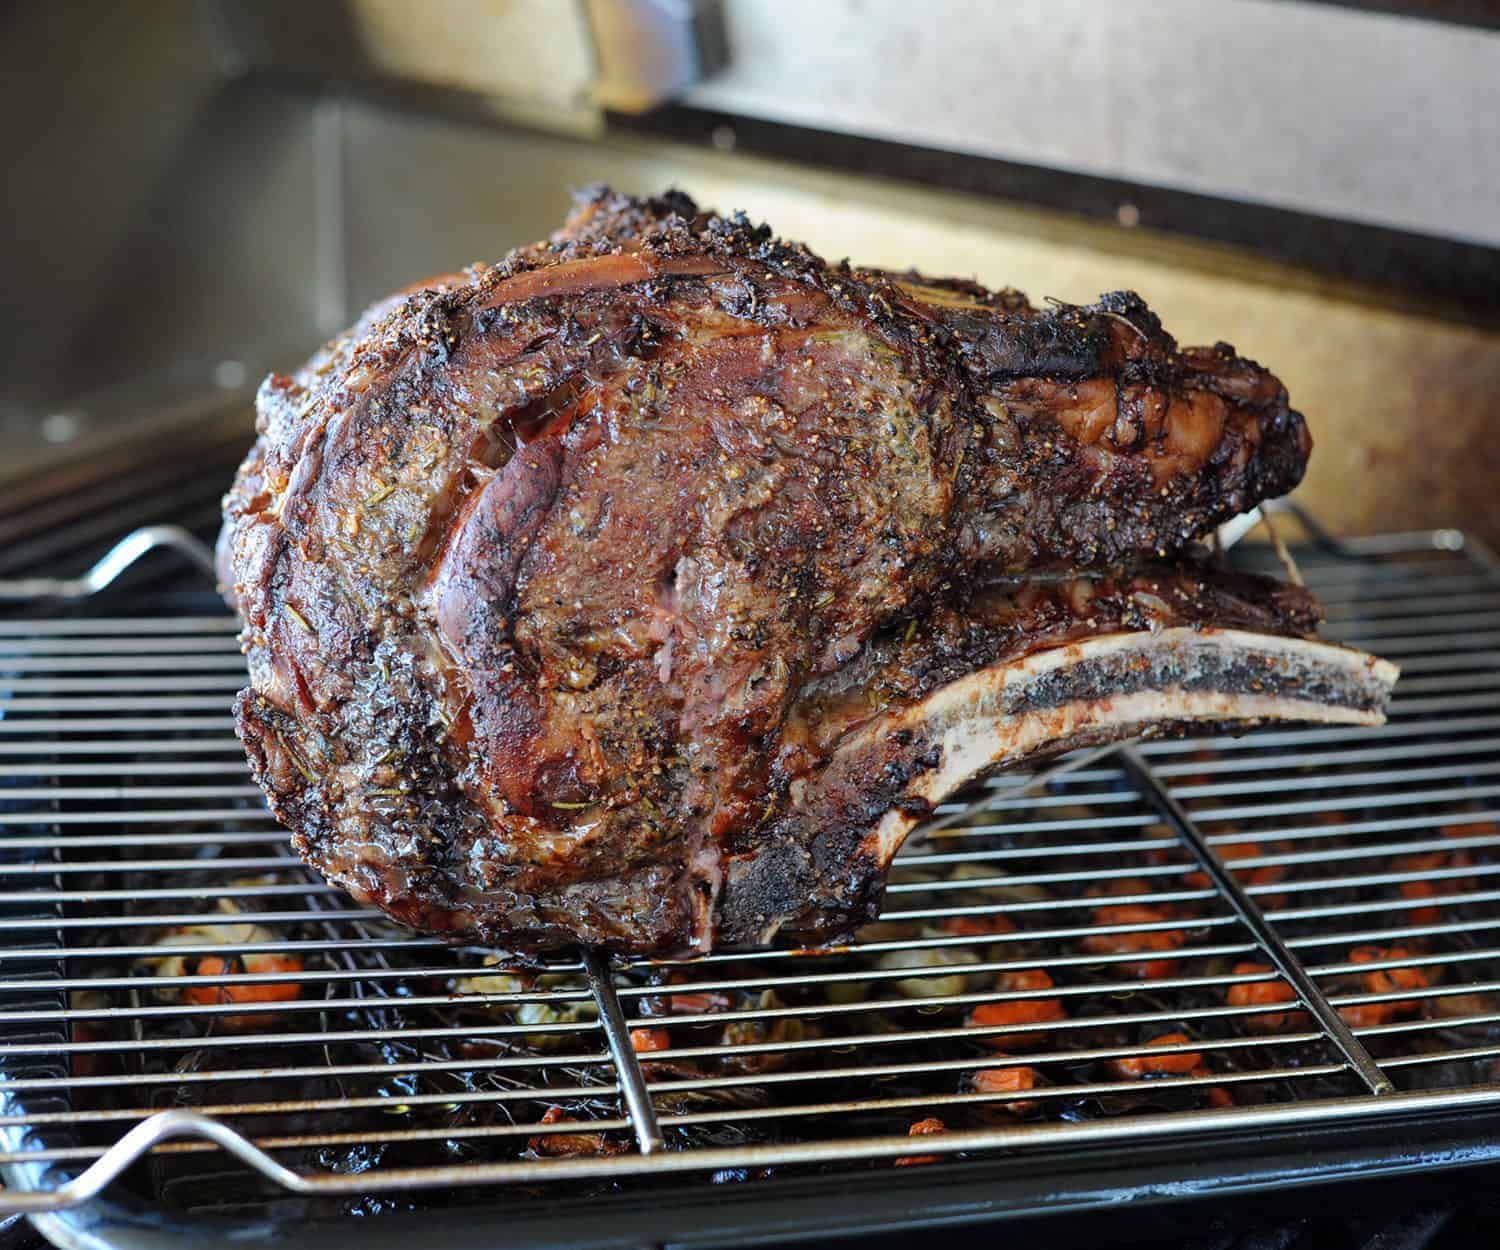 How To Cook A Prime Rib Roast On The BBQ